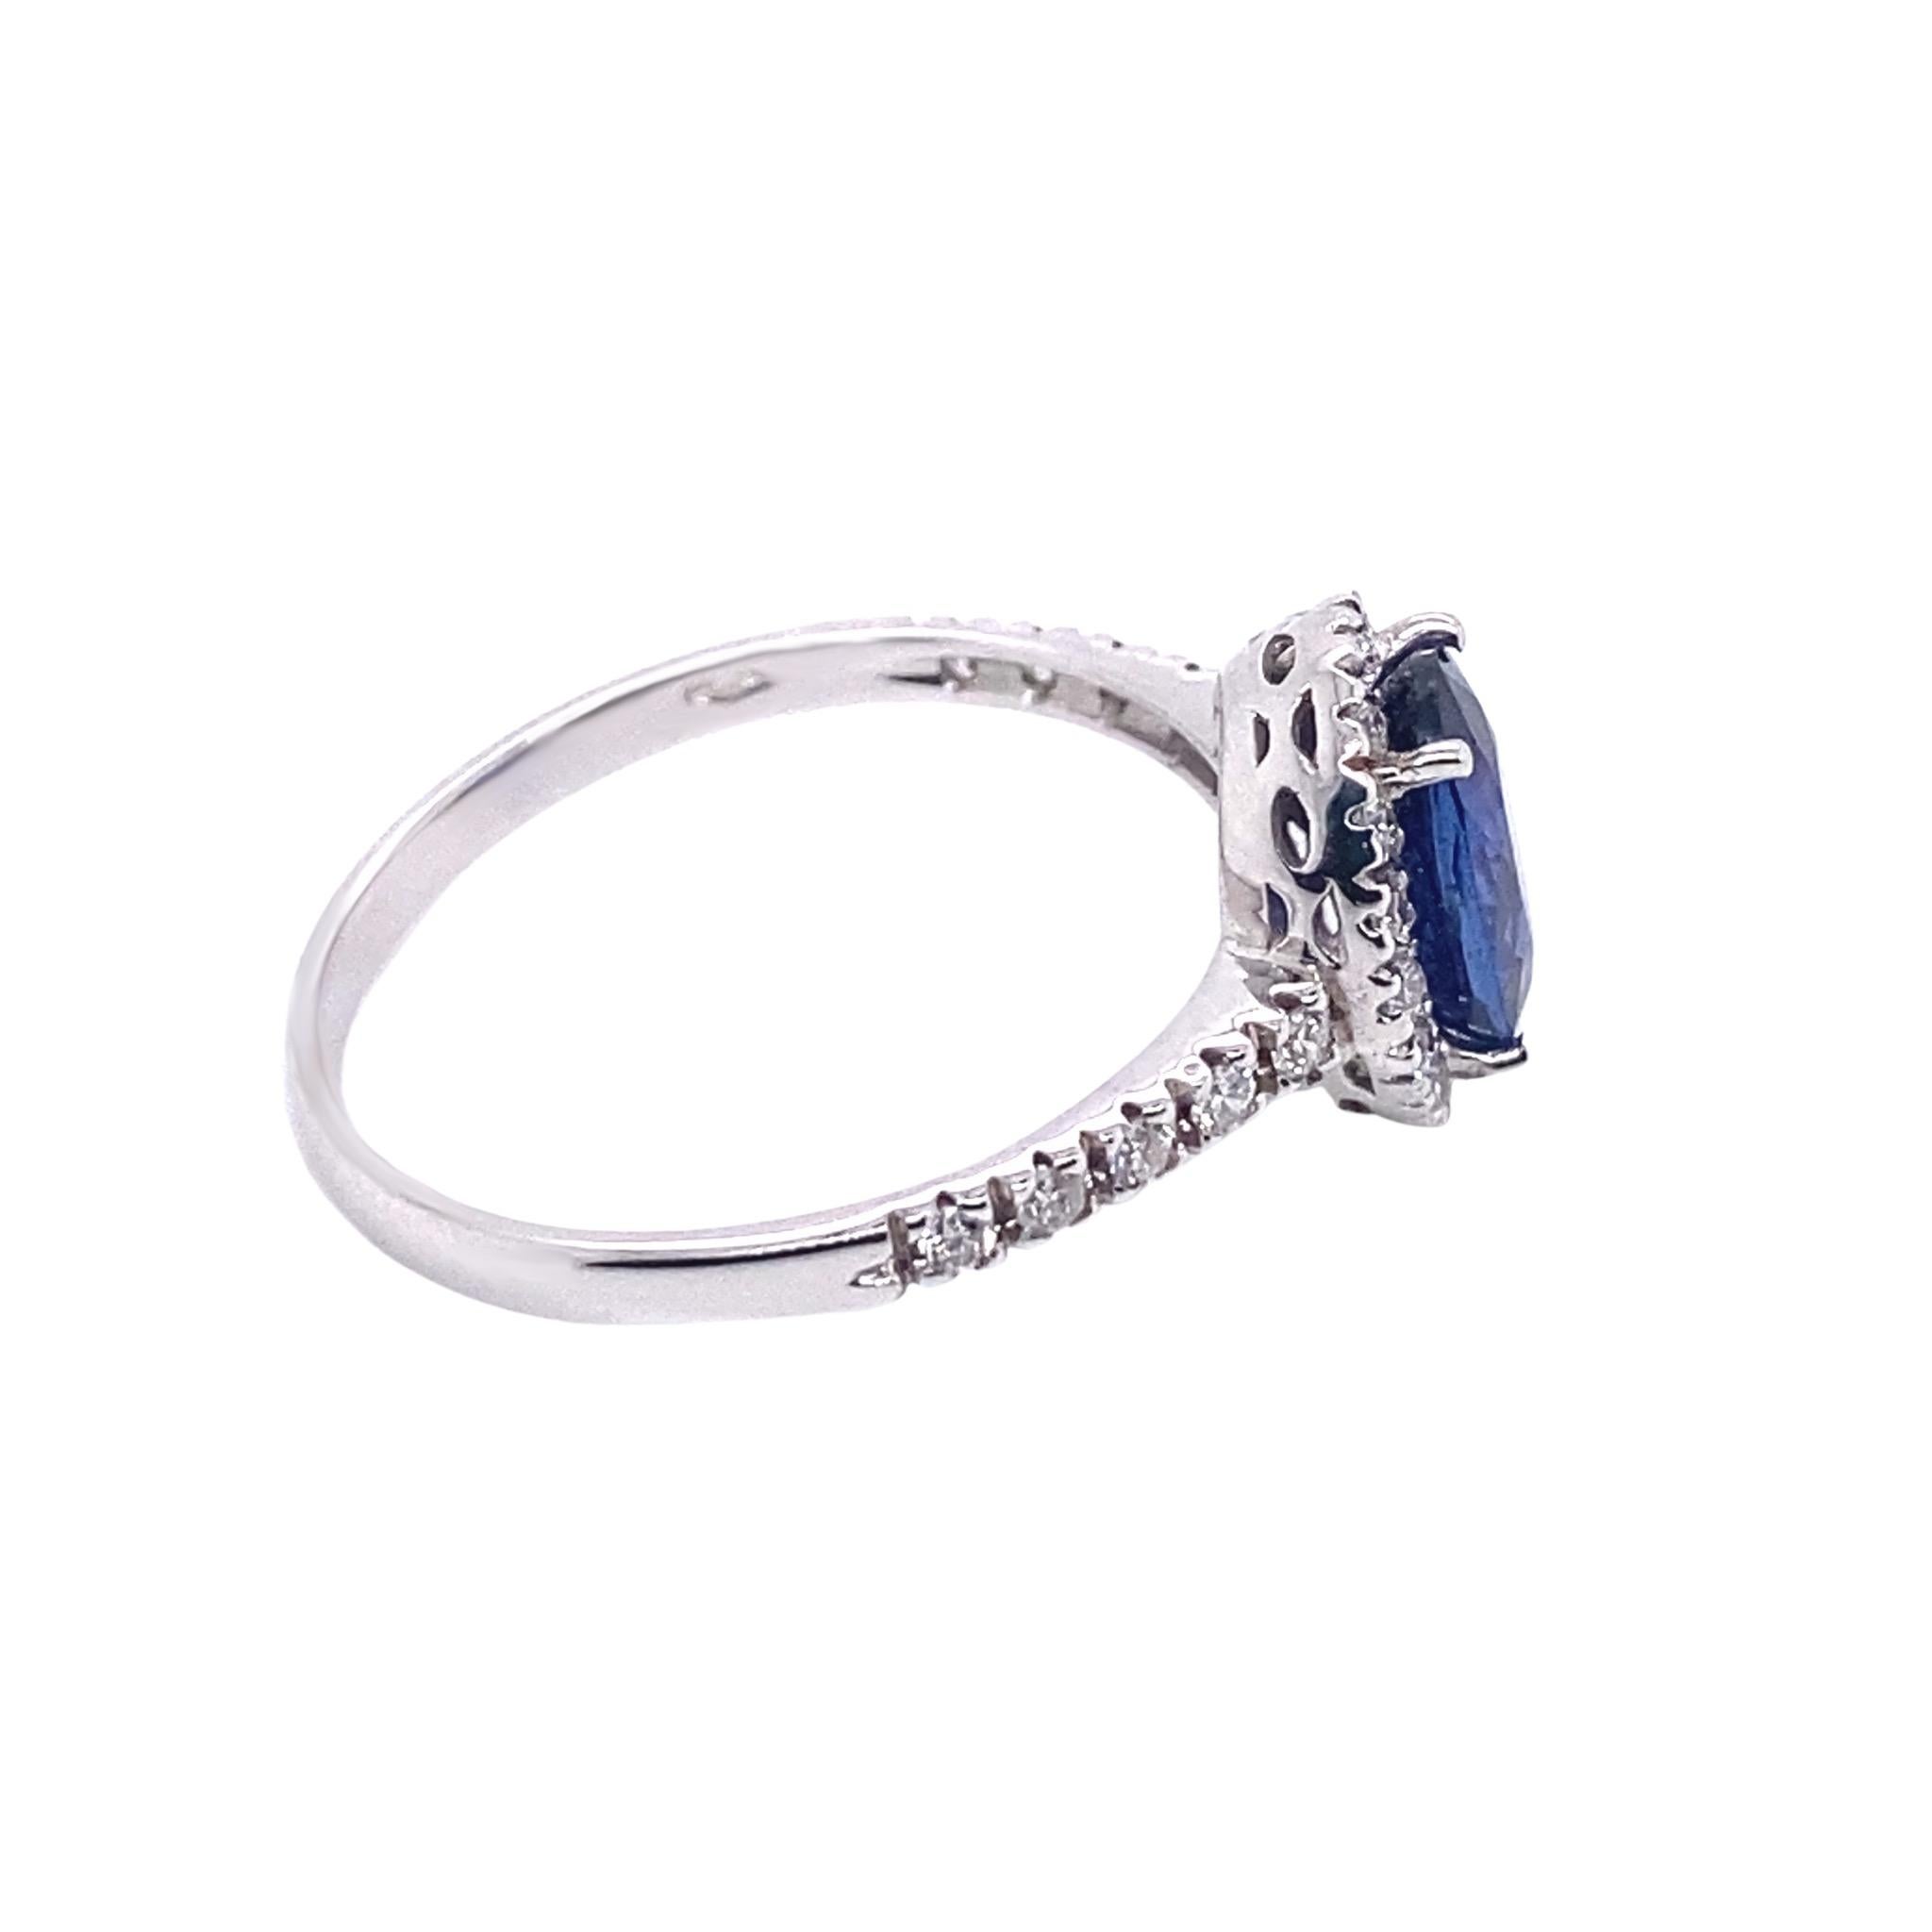 This 18-karat white gold ring is set with a single 1.51-carat blue sapphire and 0.24 carats of G VS-rated diamonds. It was designed and produced by hand in Palermo, Sicily, by master jewellers.

The setting measures 1.1 cm long and 0.9 cm across.